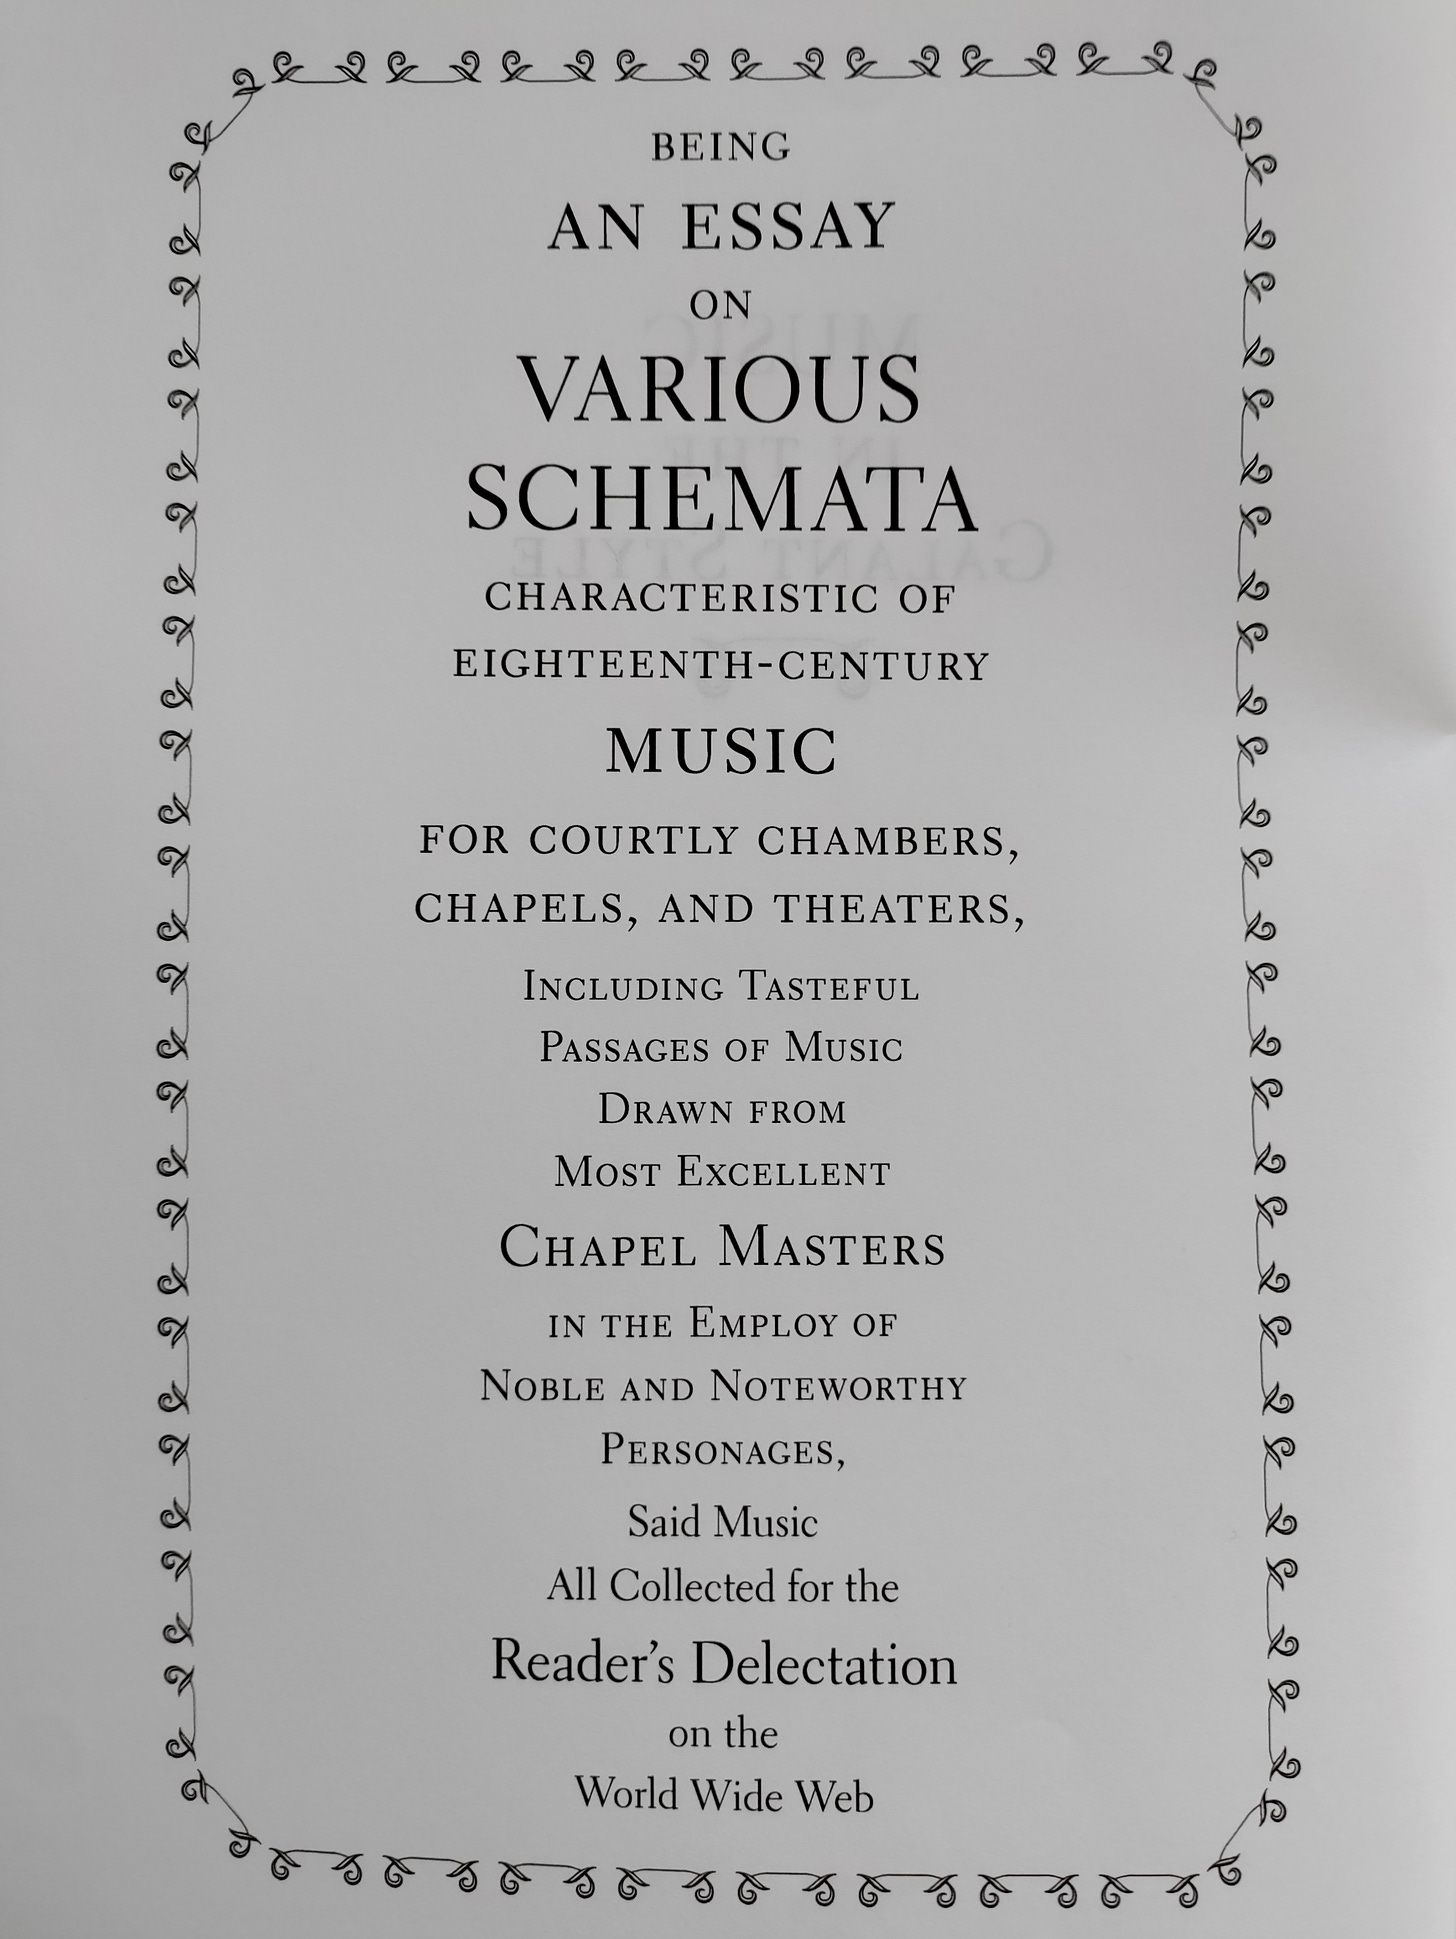 Text says: BEING  AN ESSAY  ON  VARIOUS  SCHEMATA  CHARACTERISTIC OF  EIGHTEENTH-CENTURY  MUSIC  FOR COURTLY CHAMBERS,  CHAPELS, AND THEATERS,  INCLUDING TASTEFUL  PASSAGES OF MUSIC  DRAWN FROM  MOST EXCELLENT  CHAPEL MASTERS  IN THE EMPLOY OF  NOBLE AND NOTEWORTHY  PERSONAGES,  SAID MUSIC  ALL COLLECTED FOR THE  READER'S DELECTATION  ON THE  WORLD WIDE WEB